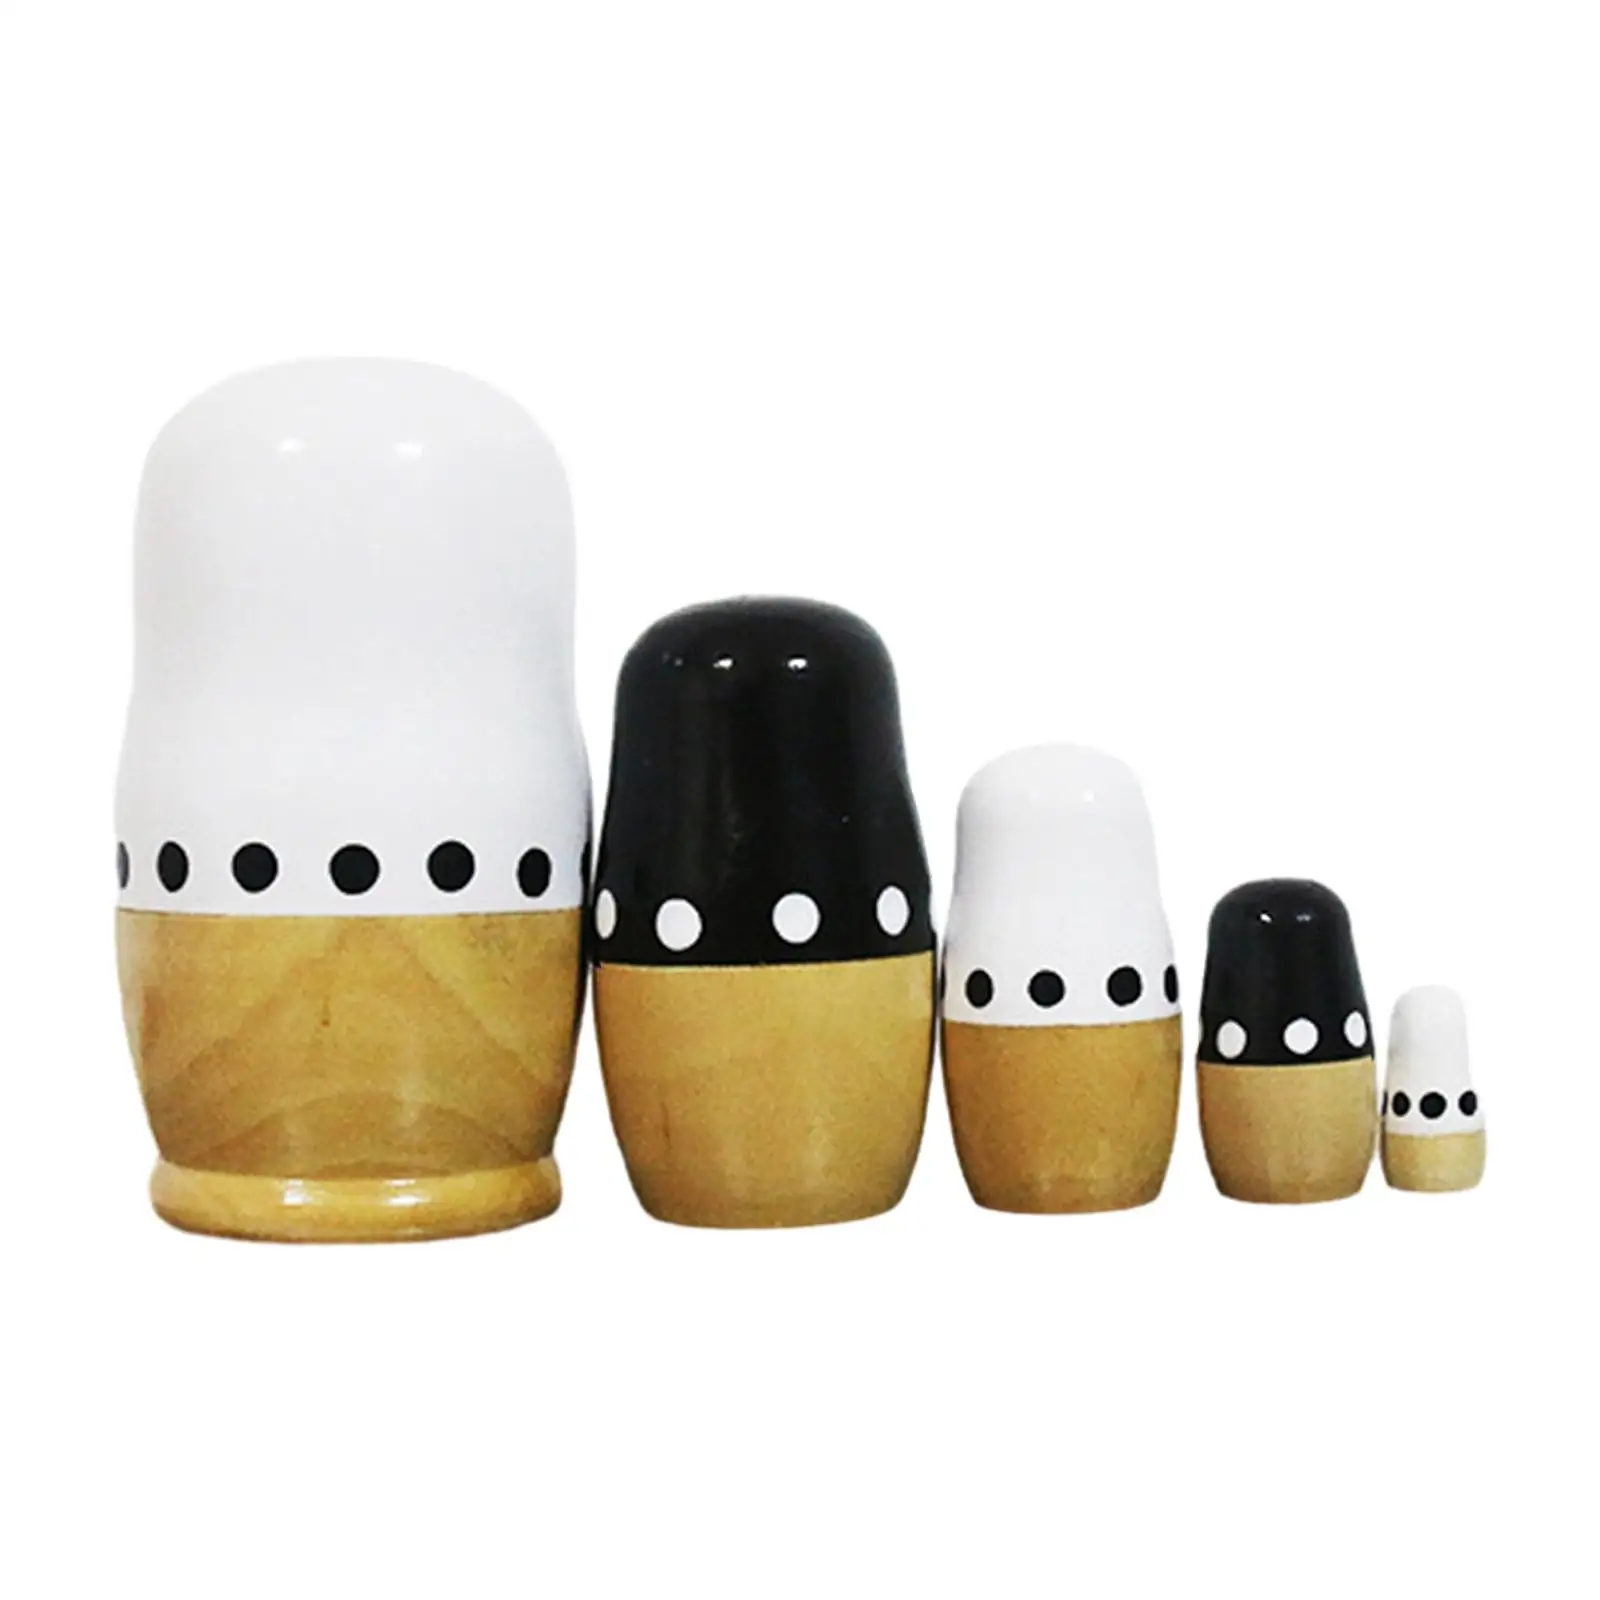 5Pcs Russian Dolls Five Layers of Russian Nesting Doll for Kids Children